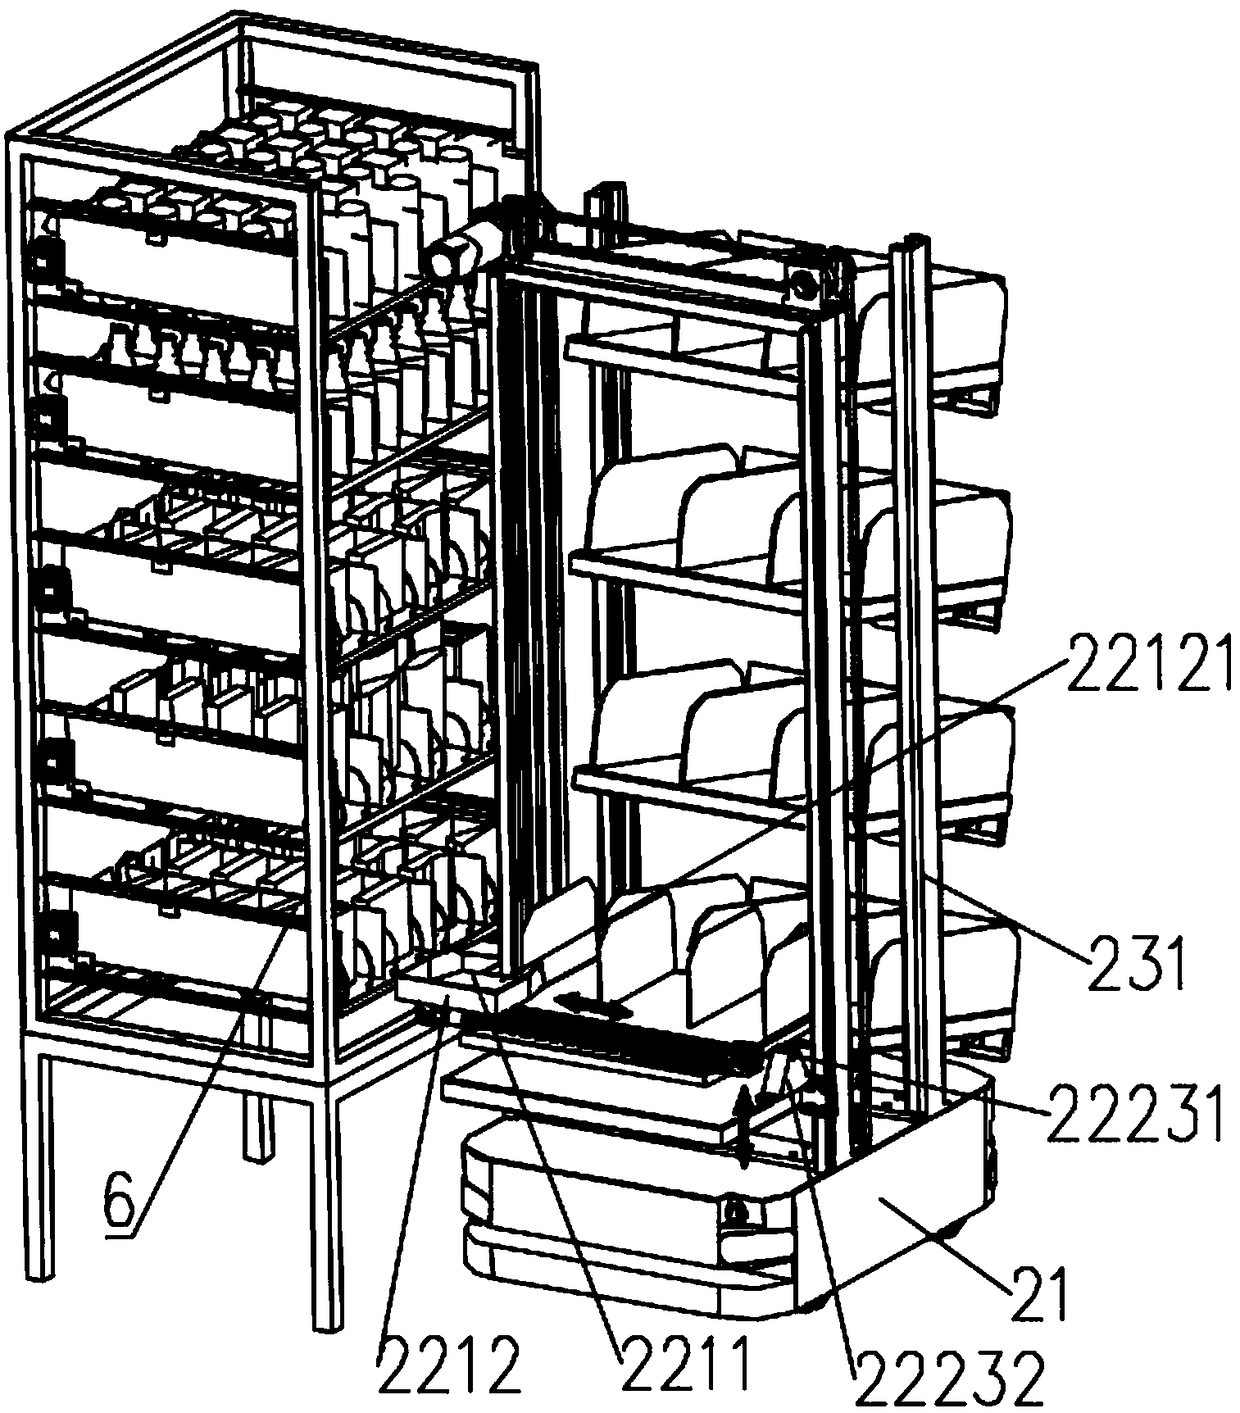 Fruit picking type sorting system, sorting AGVs and sorting shelves